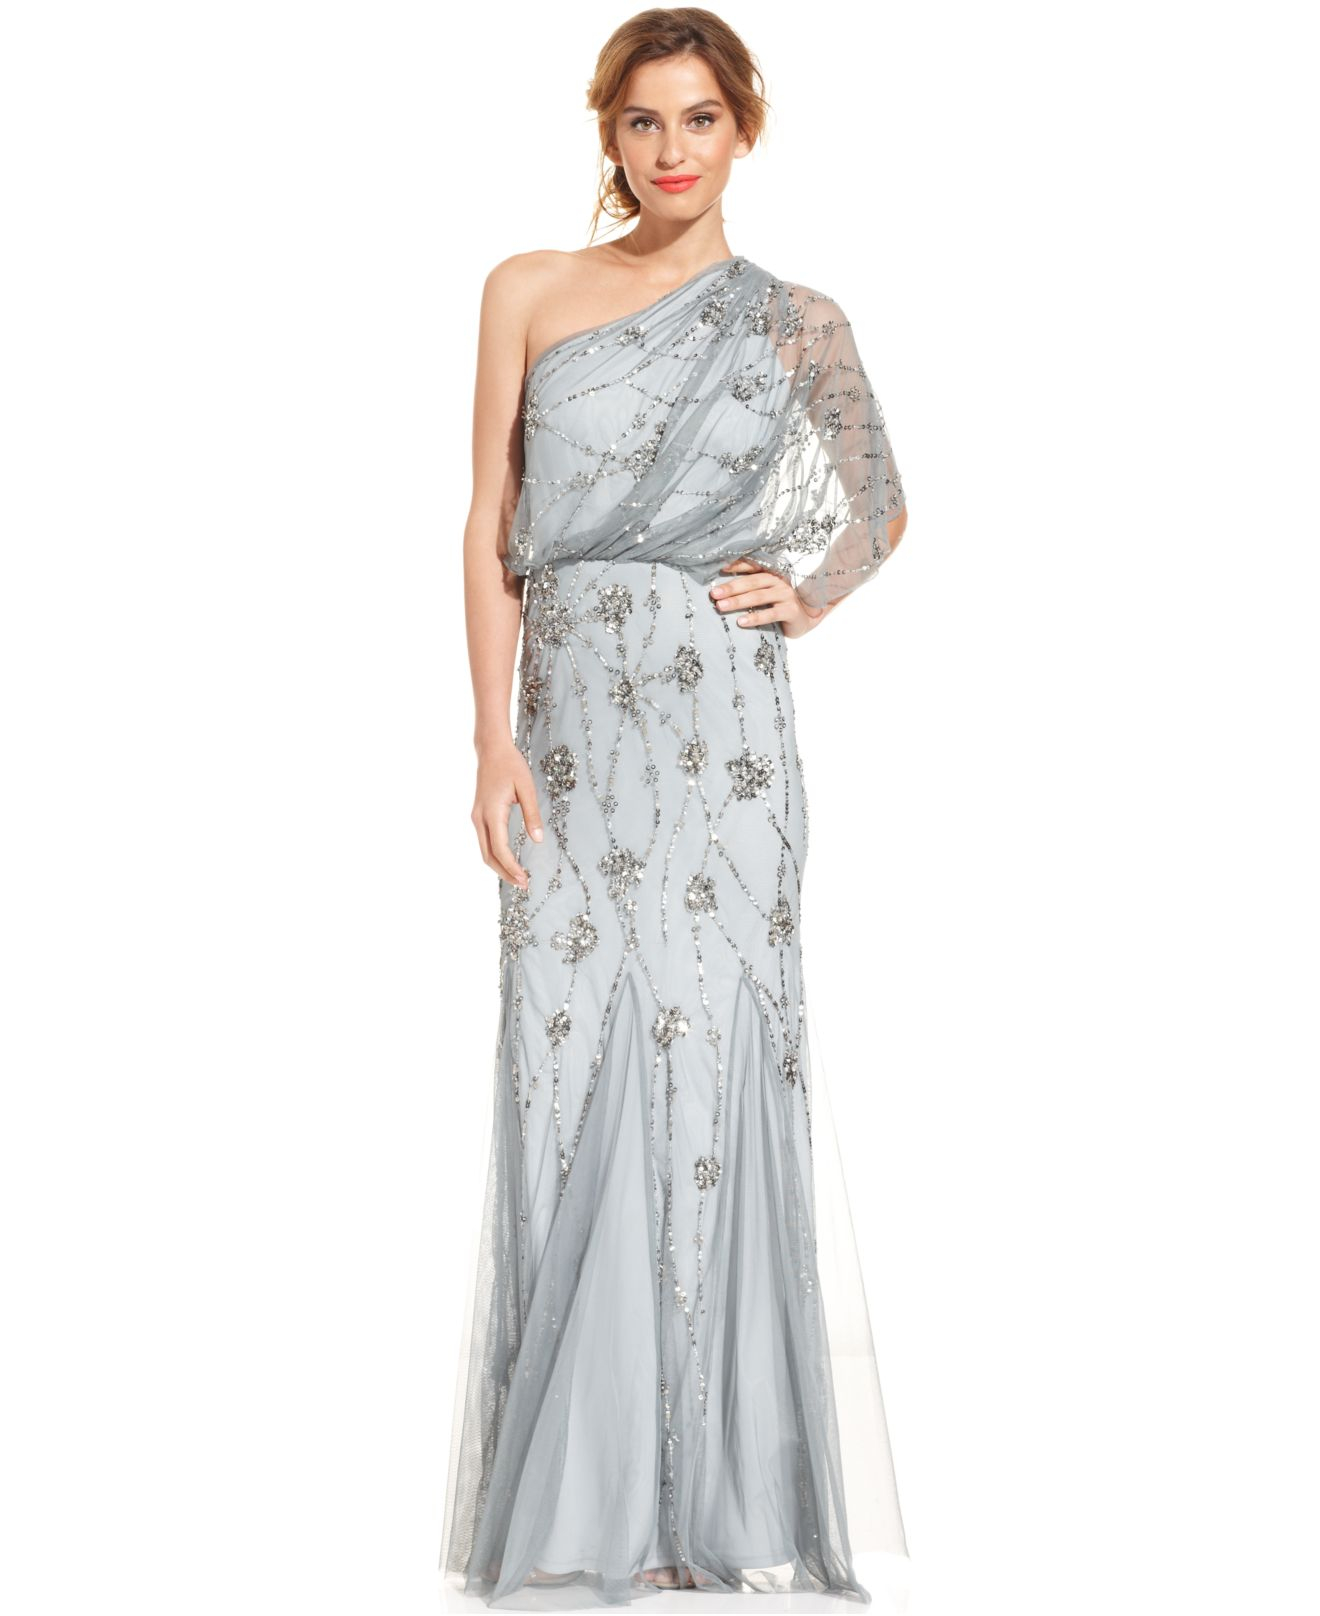 Adrianna Papell Oneshoulder Beaded Blouson Gown in Slate (Gray) - Lyst